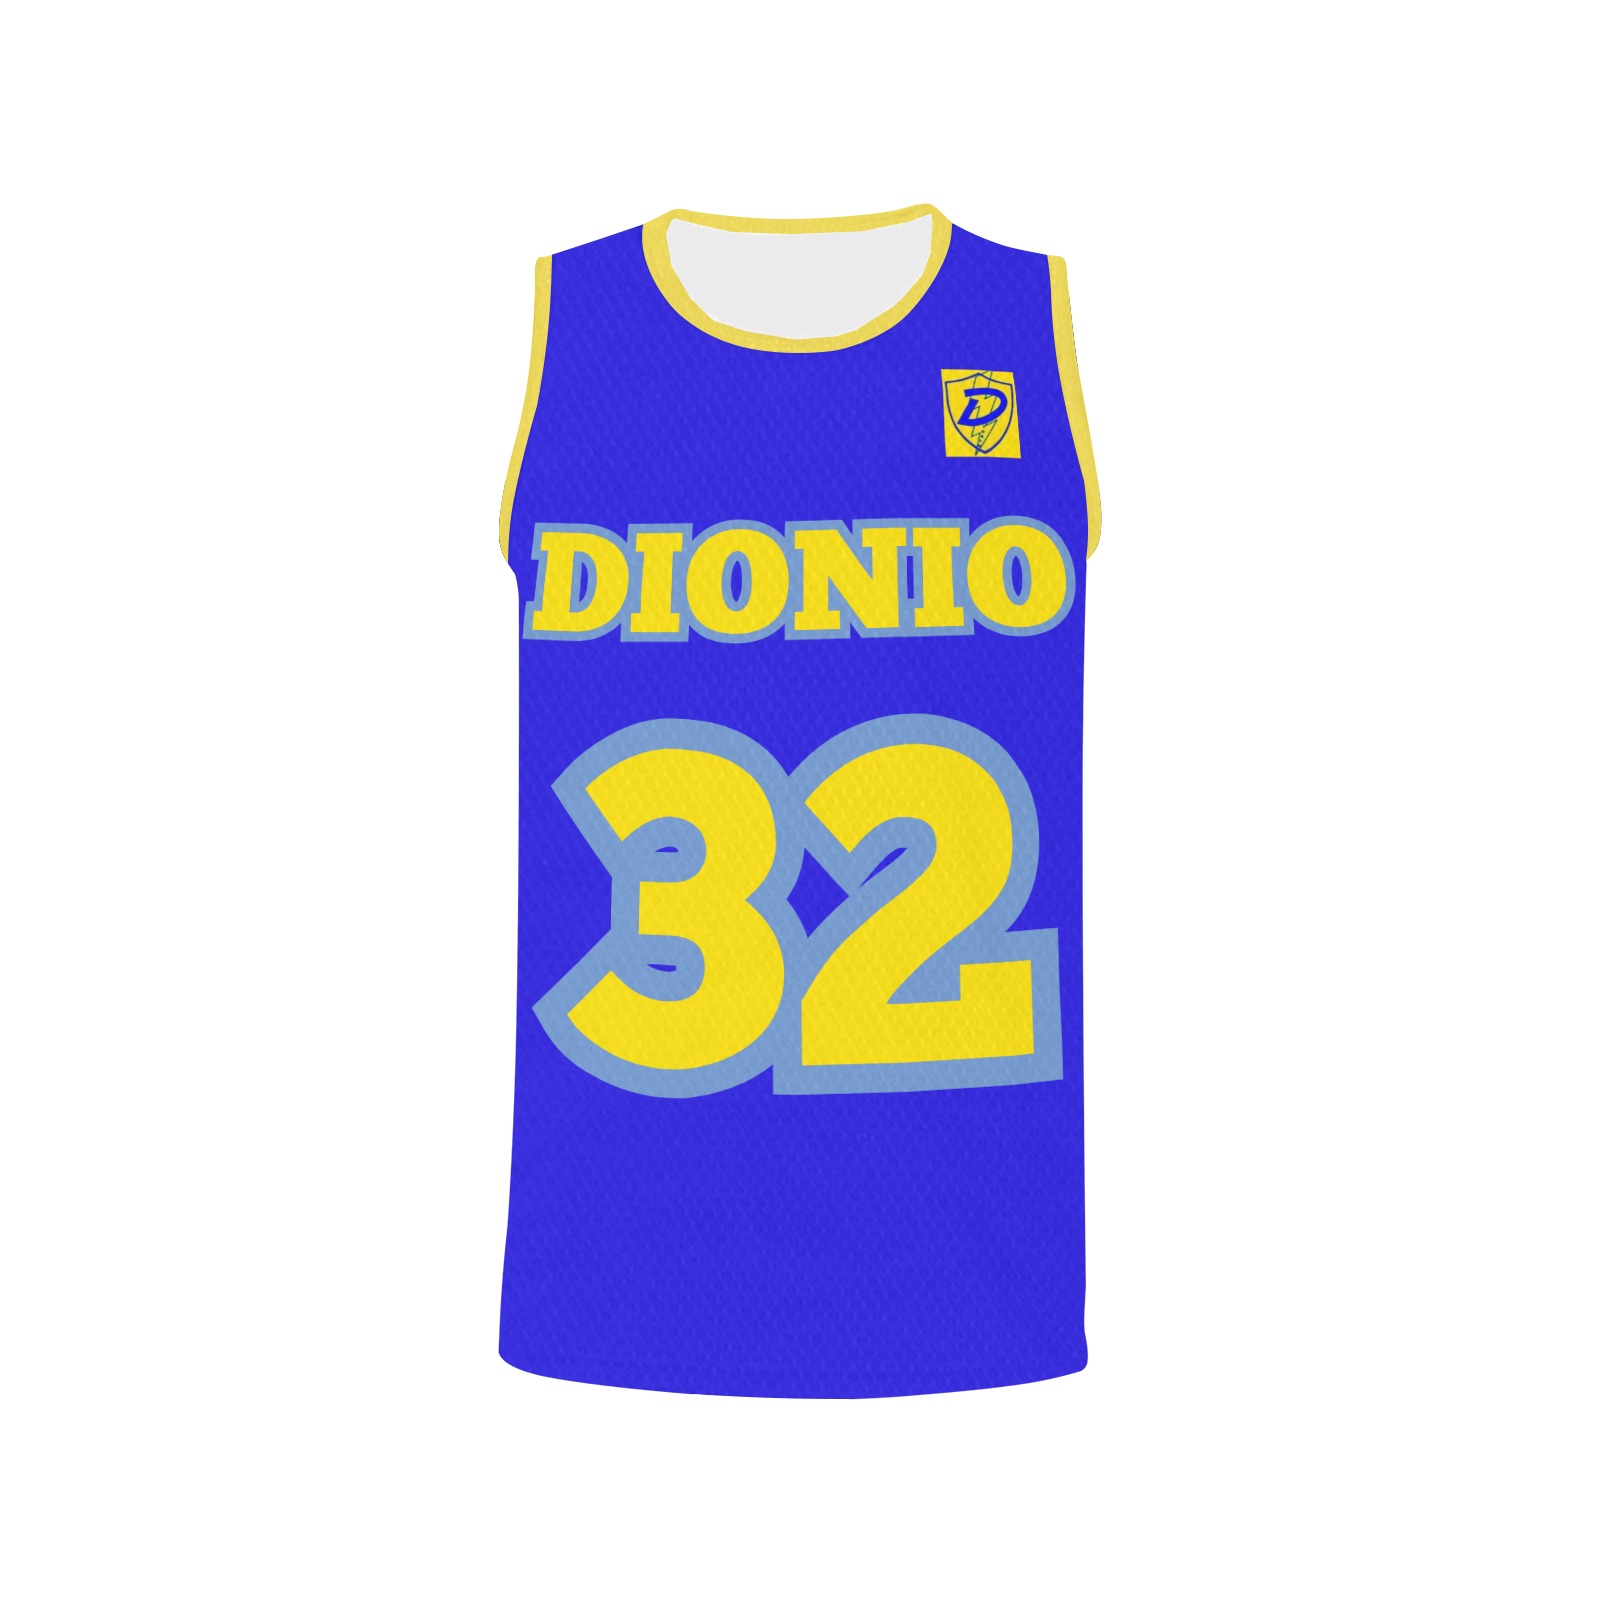 DIONIO Clothing - Basketball Jersey (Blue & Yellow #32) All Over Print Basketball Jersey